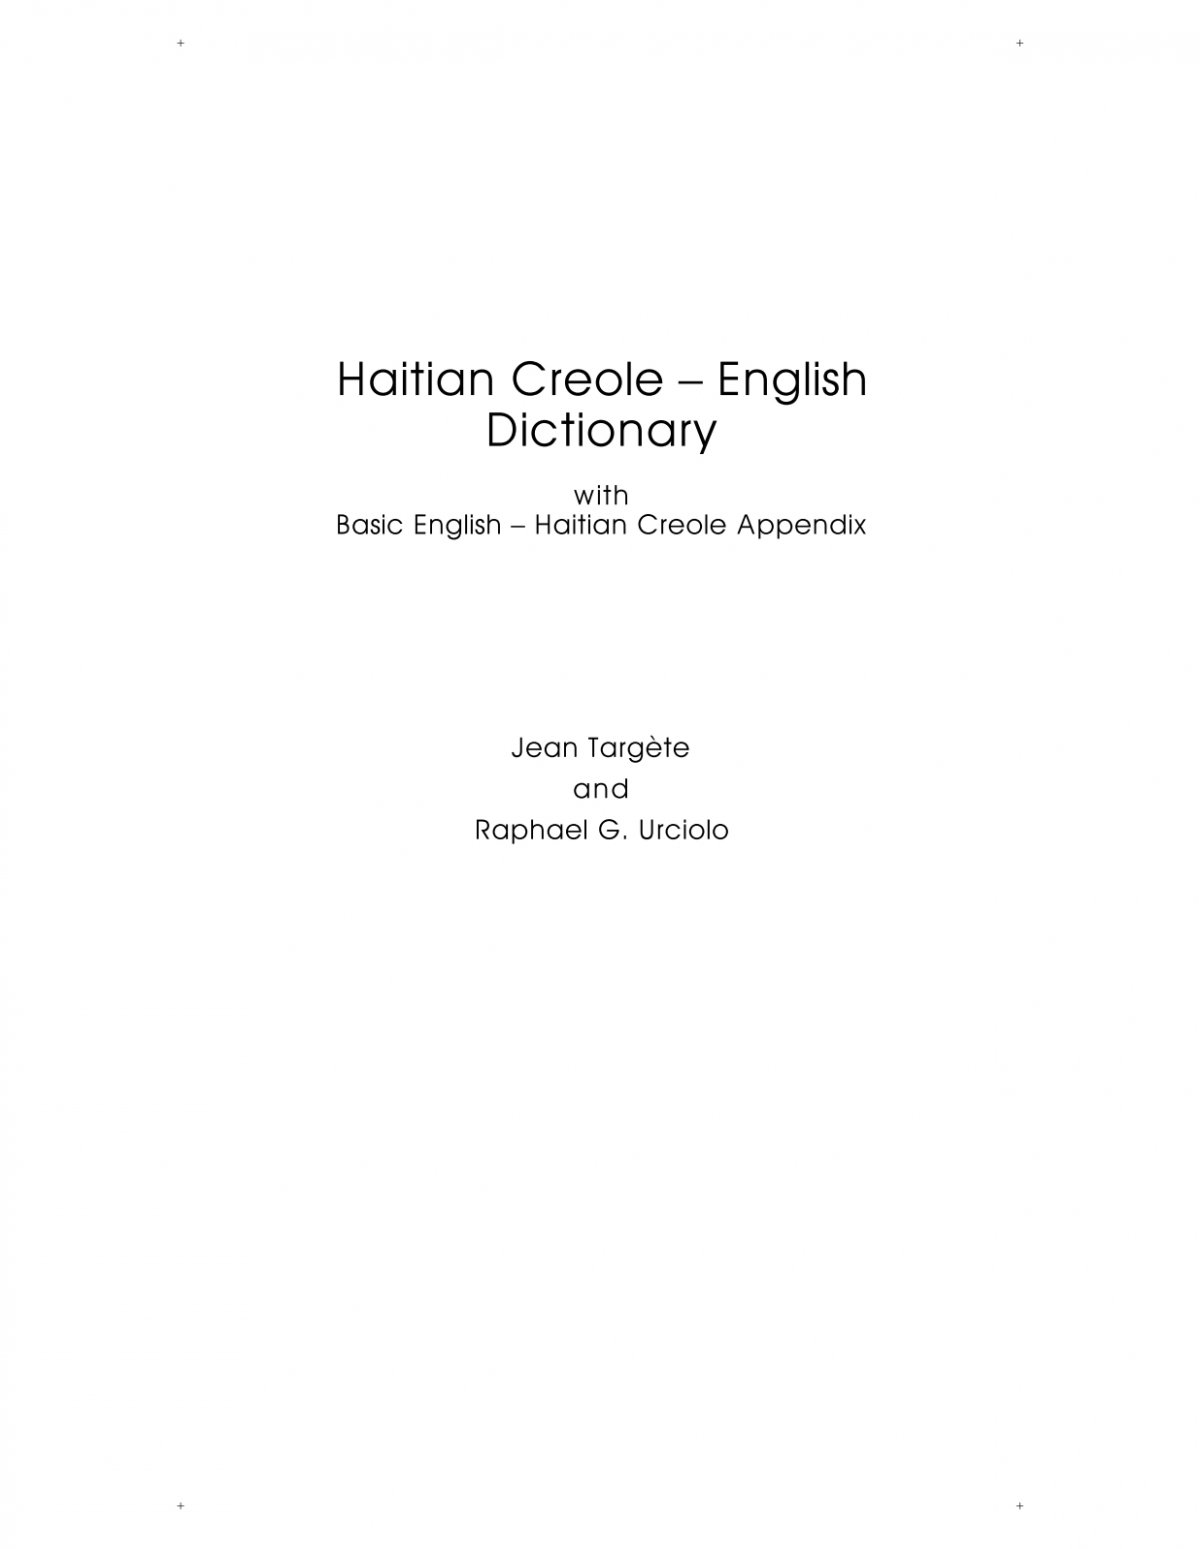 Haitian_Creole_English_Dictionary_2nd_printing picture